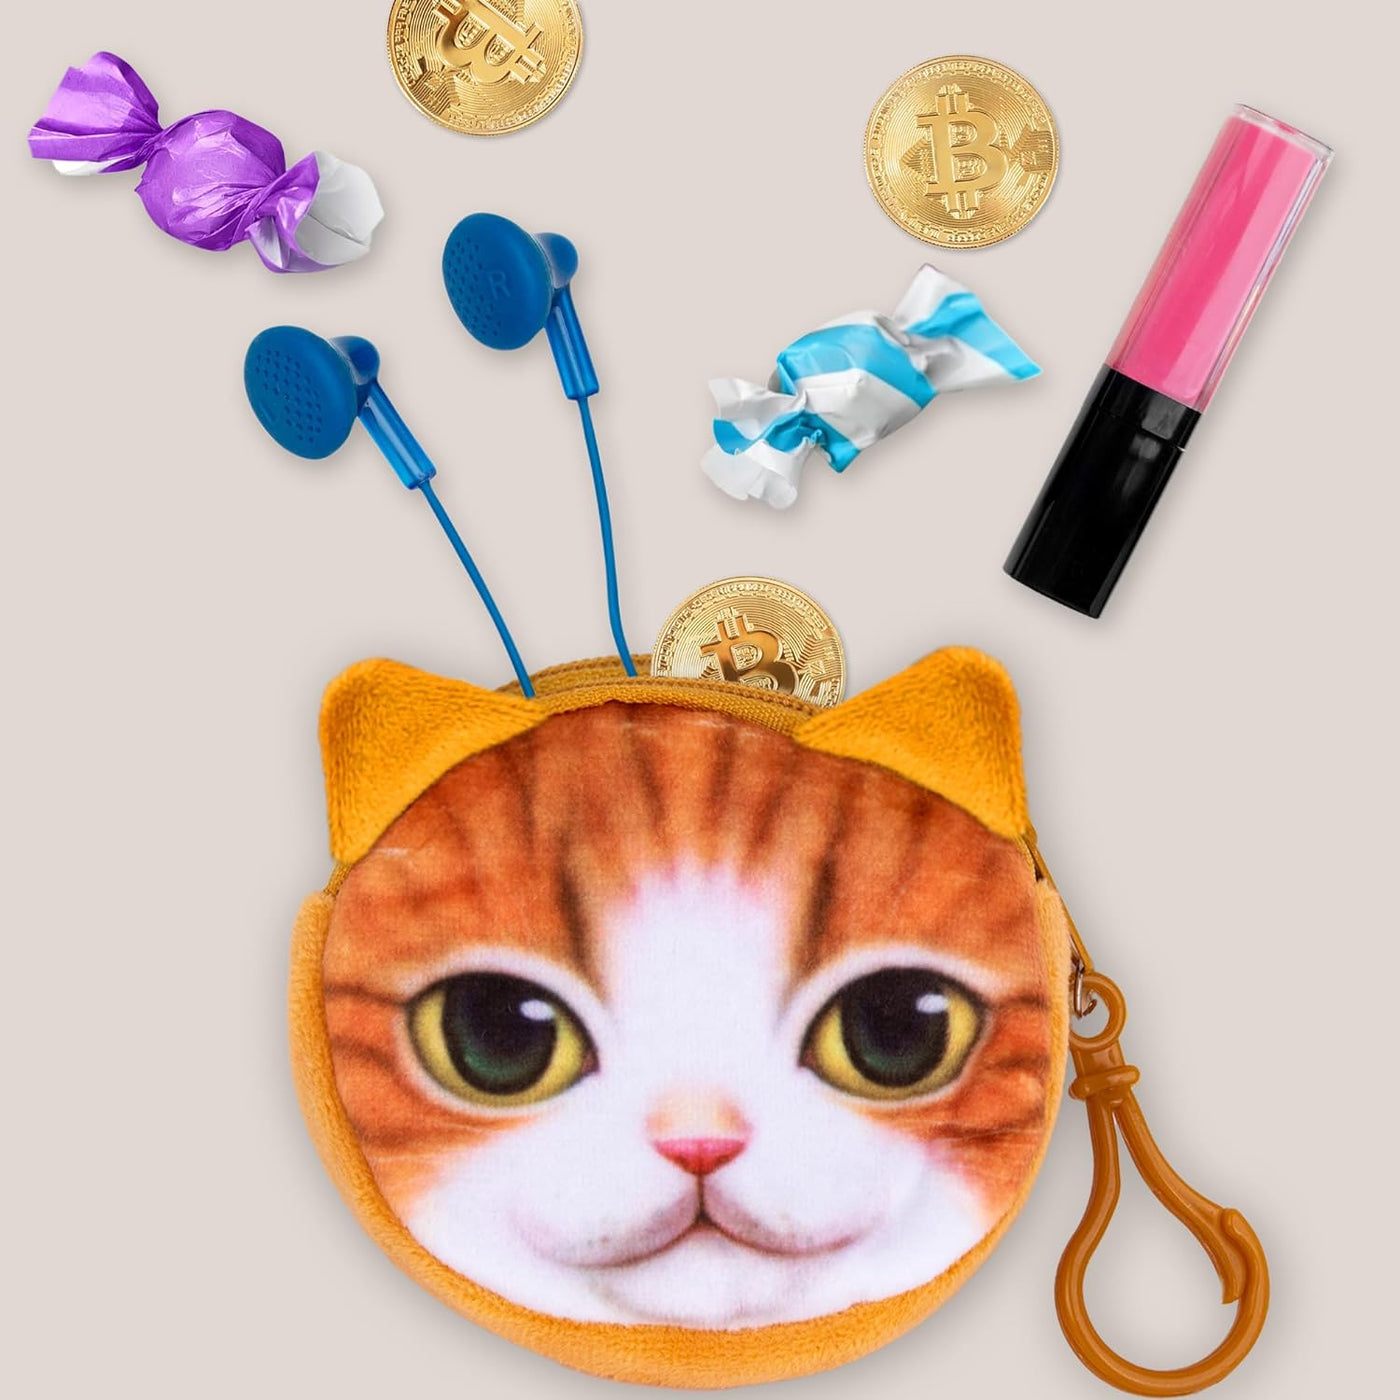 ArtCreativity Cat Coin Purse Set - Pack of 12 Mini Coin Purses - Cute Coin Purse for Girls with Adorable Animal Faces - Tiny Coin Purses for Cat Themed Party Favors - Kitty Birthday Party Supplies